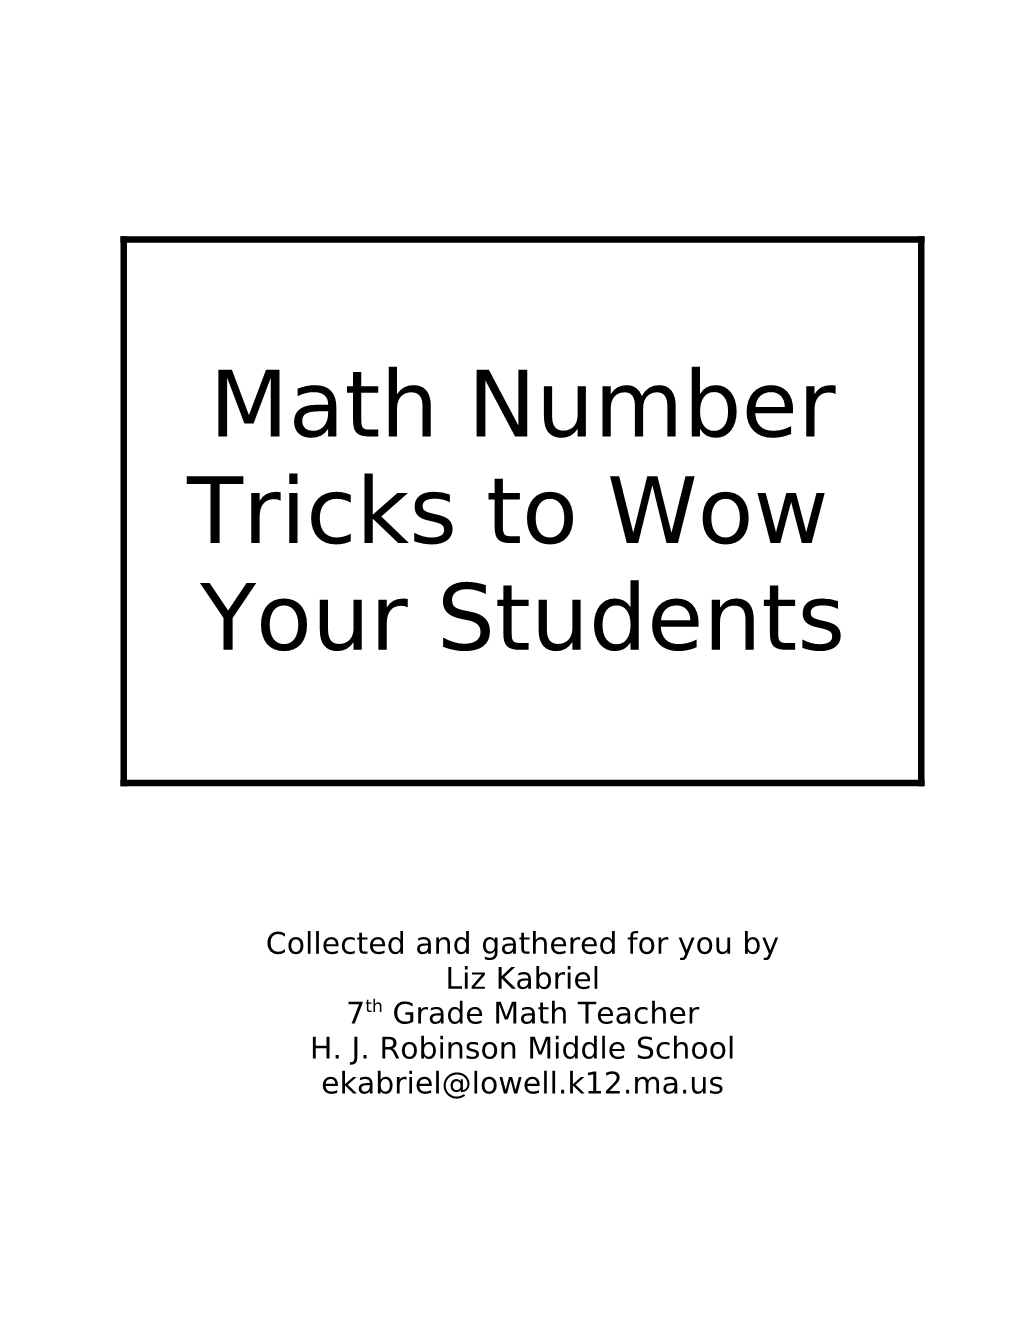 Math Number Tricks to Wow